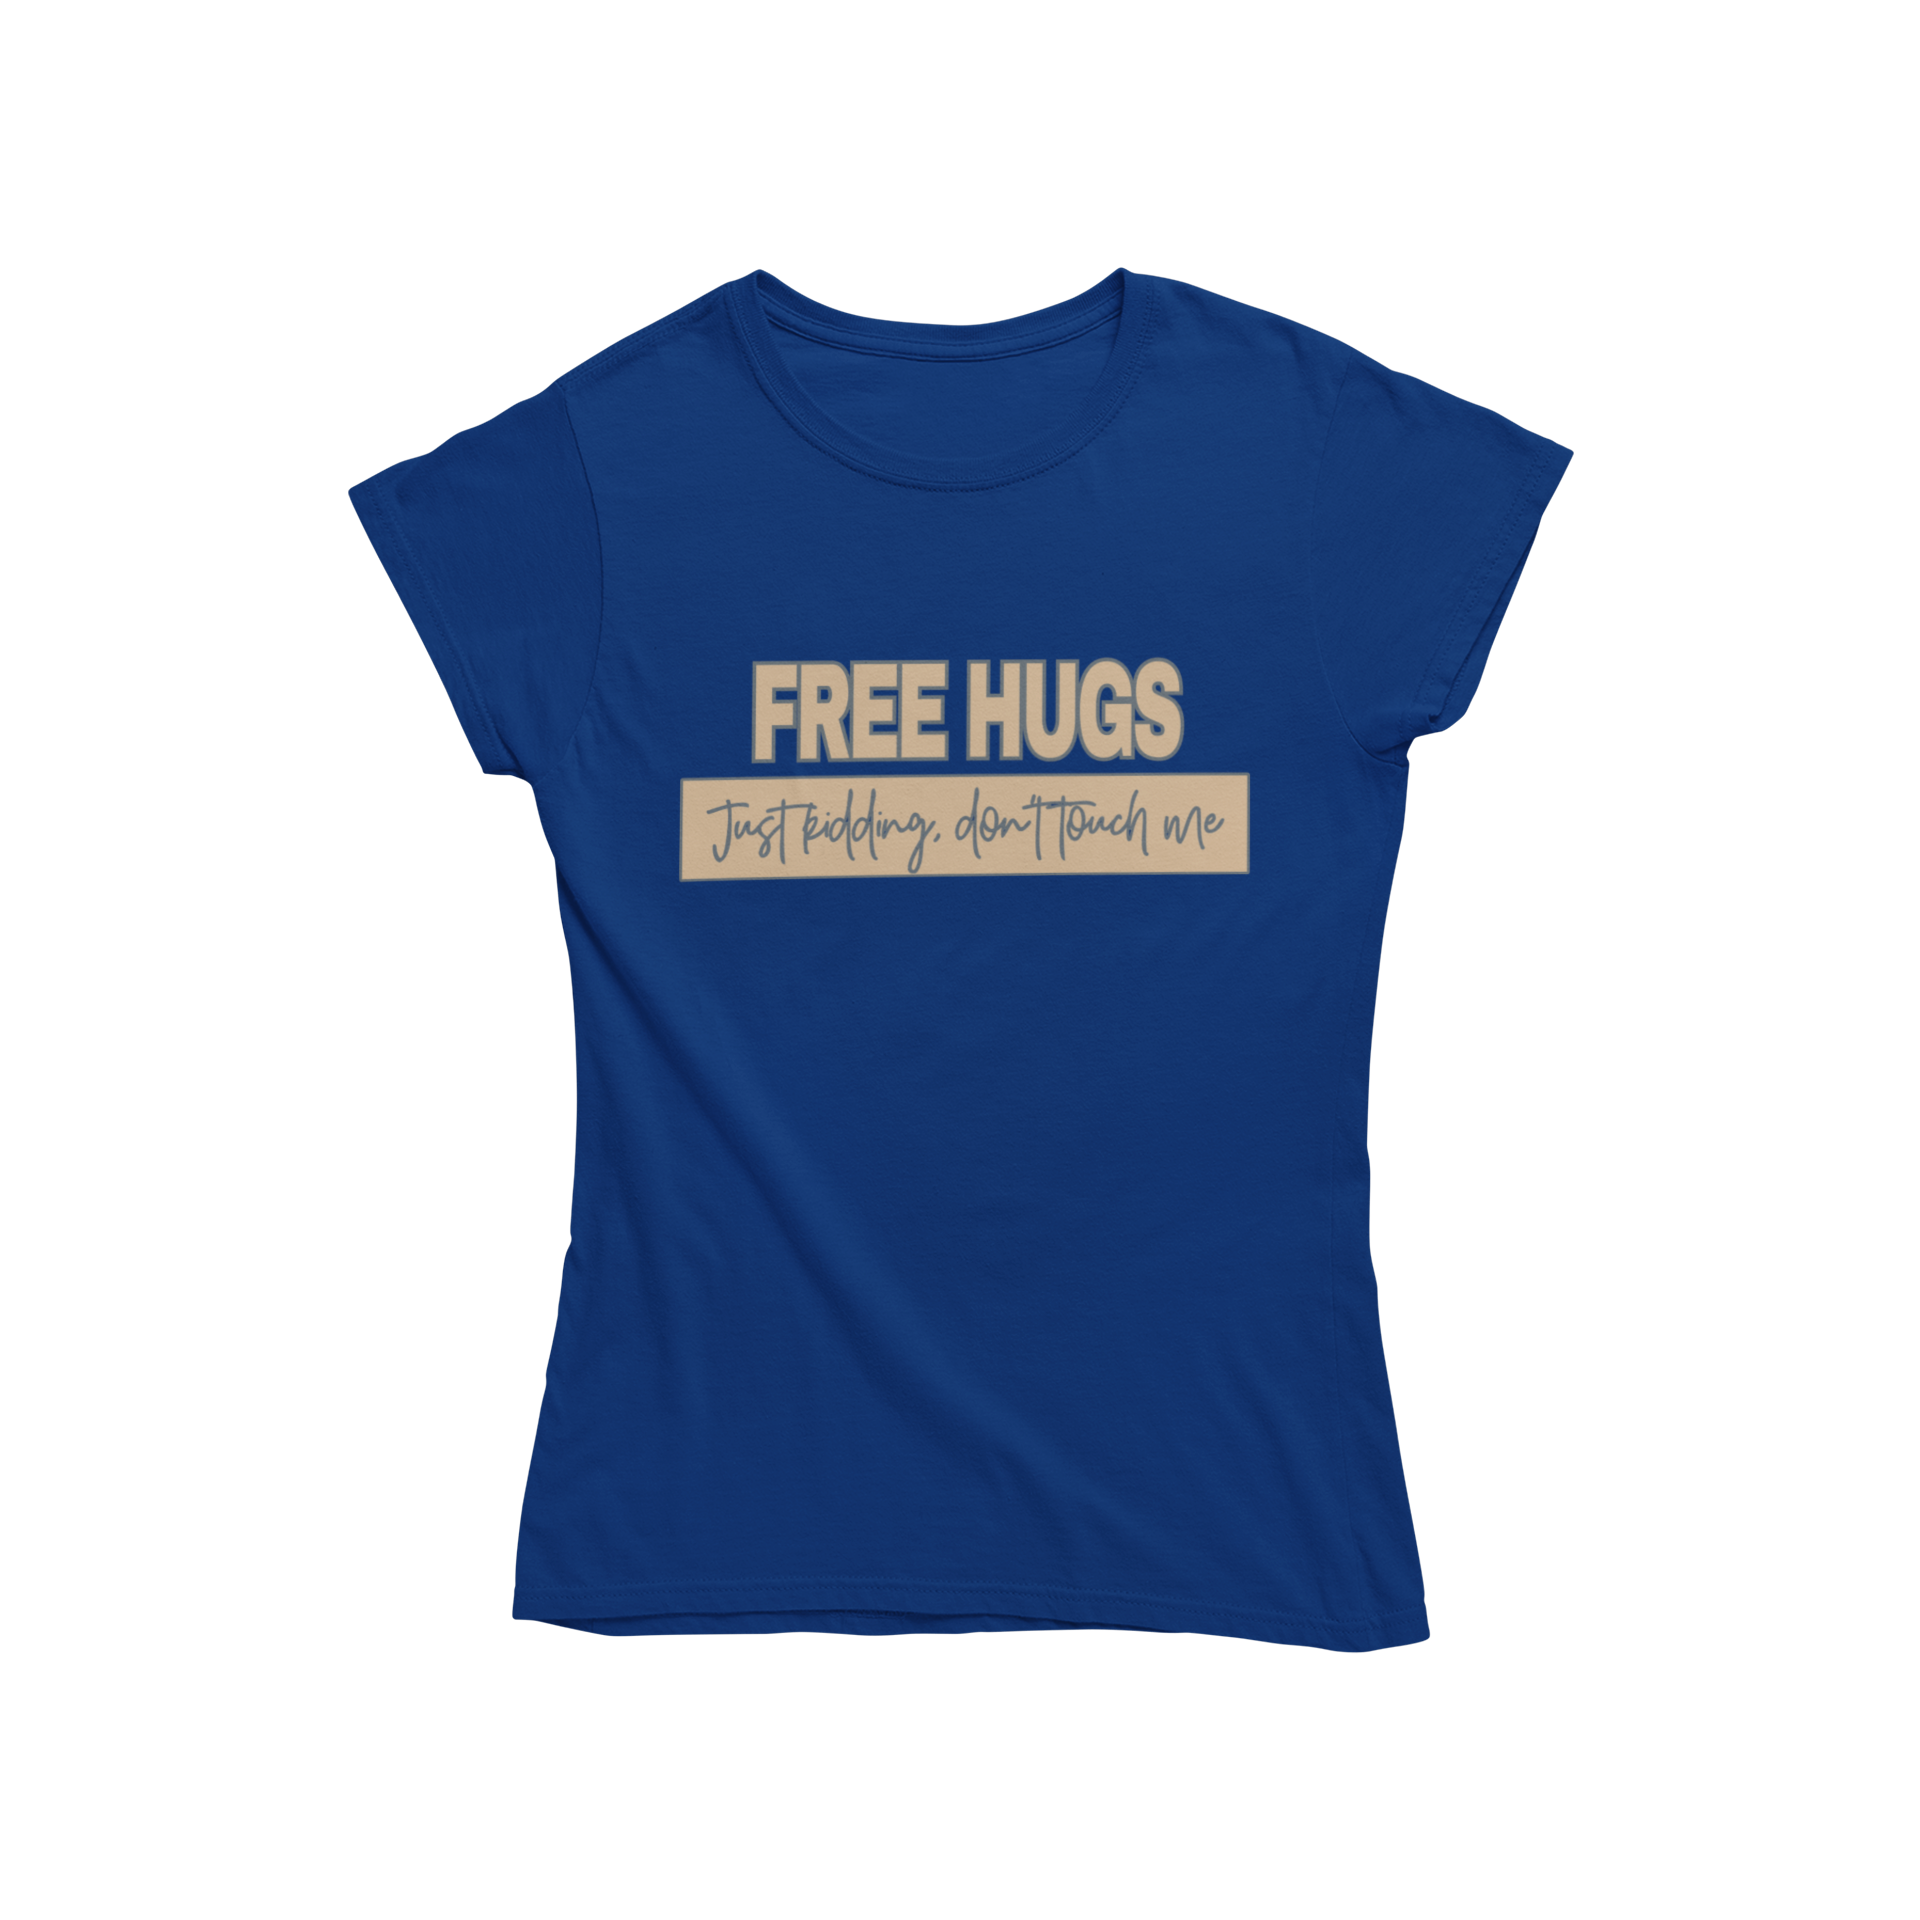 This women's fitted t-shirt features a playful slogan that reads "Free Hugs - Just Kidding Don't Touch Me". Made to provide a comfortable fit, this t-shirt is perfect for any casual occasion. Show off your fun personality while making a statement with this humorous tee.